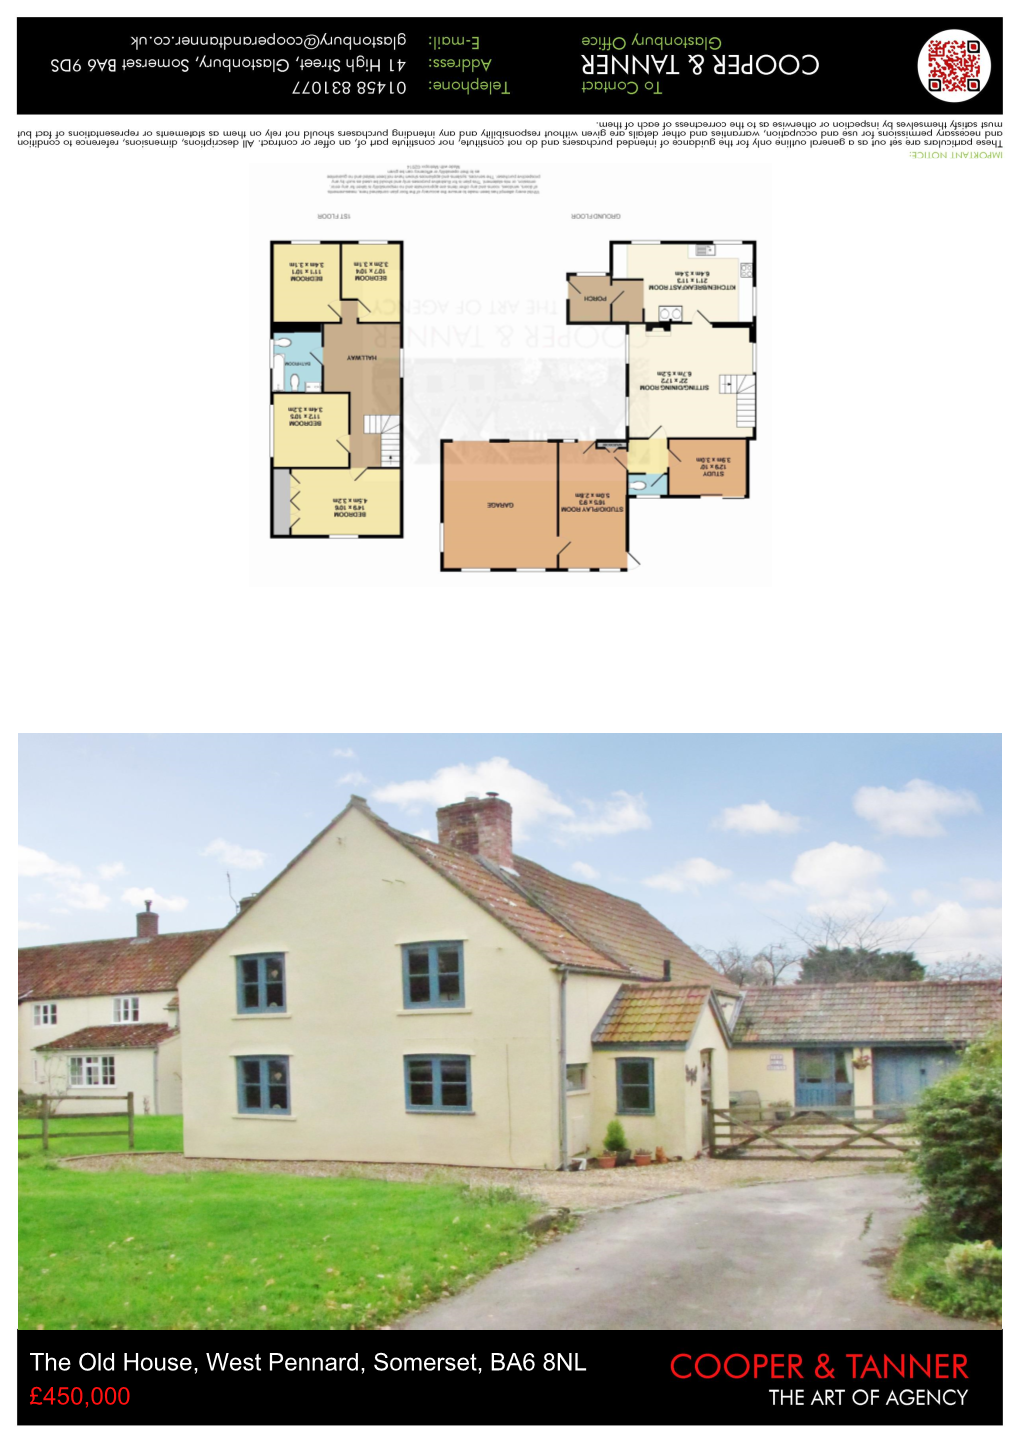 The Old House, West Pennard, Somerset, BA6 8NL £450,000